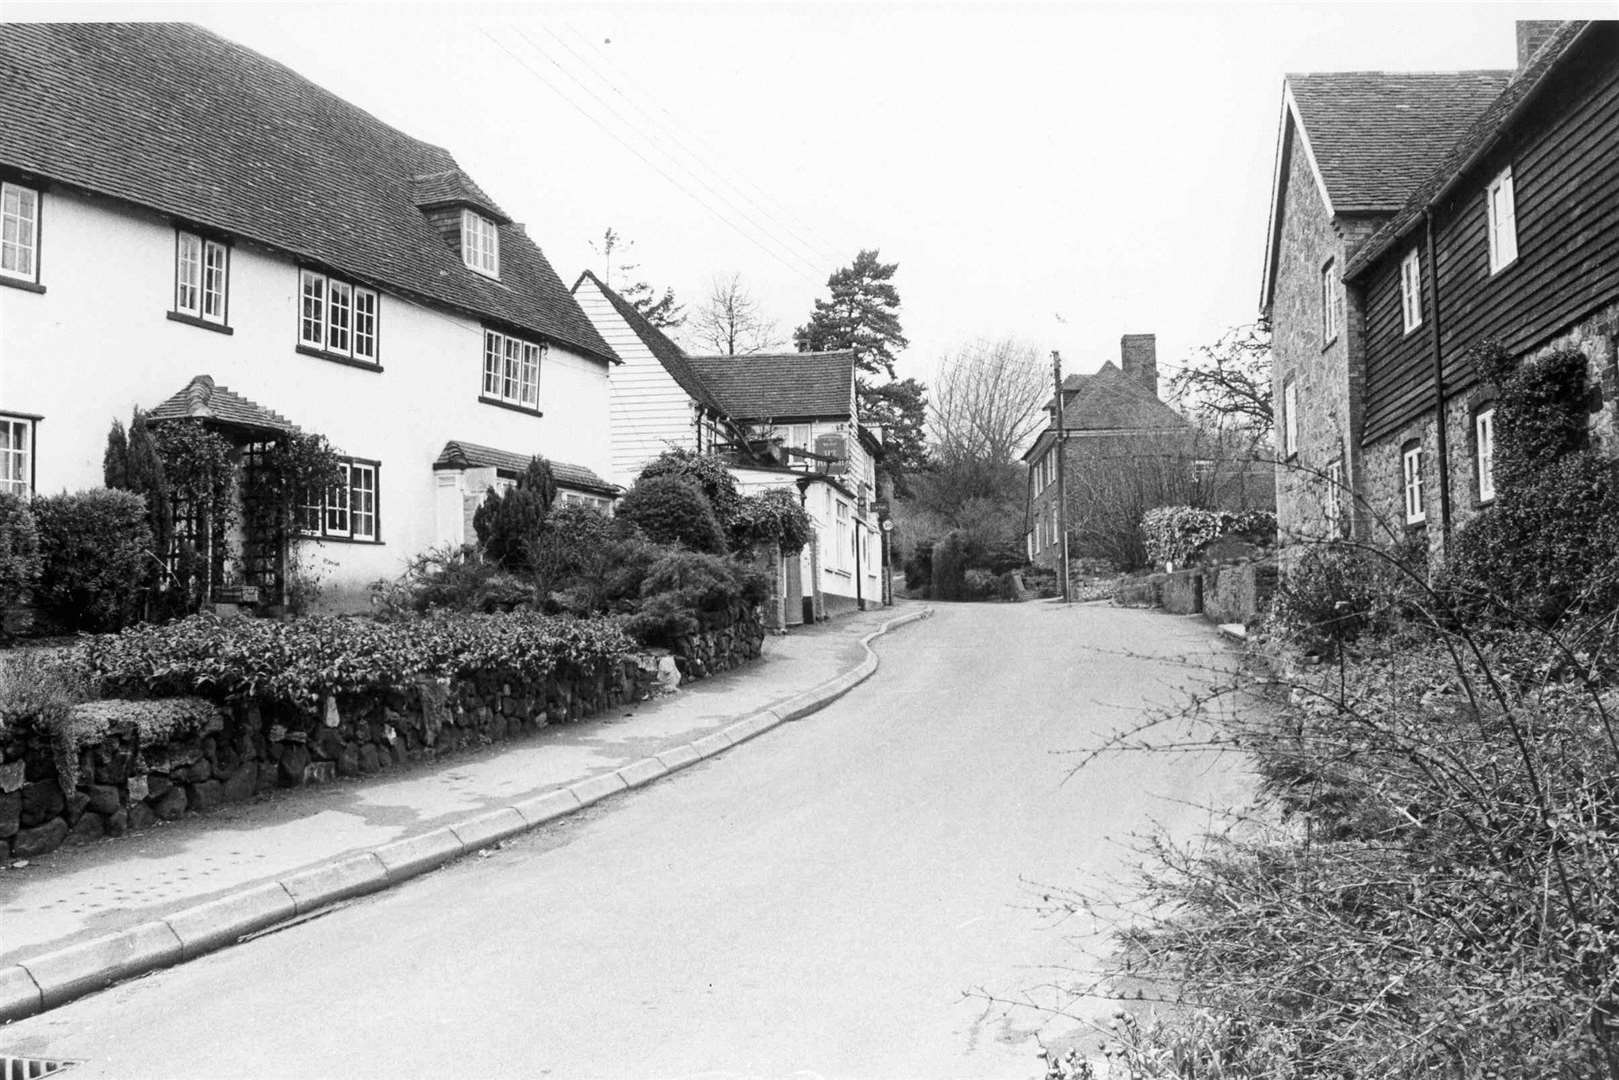 The Plough public house on the left. Pictured in 1985